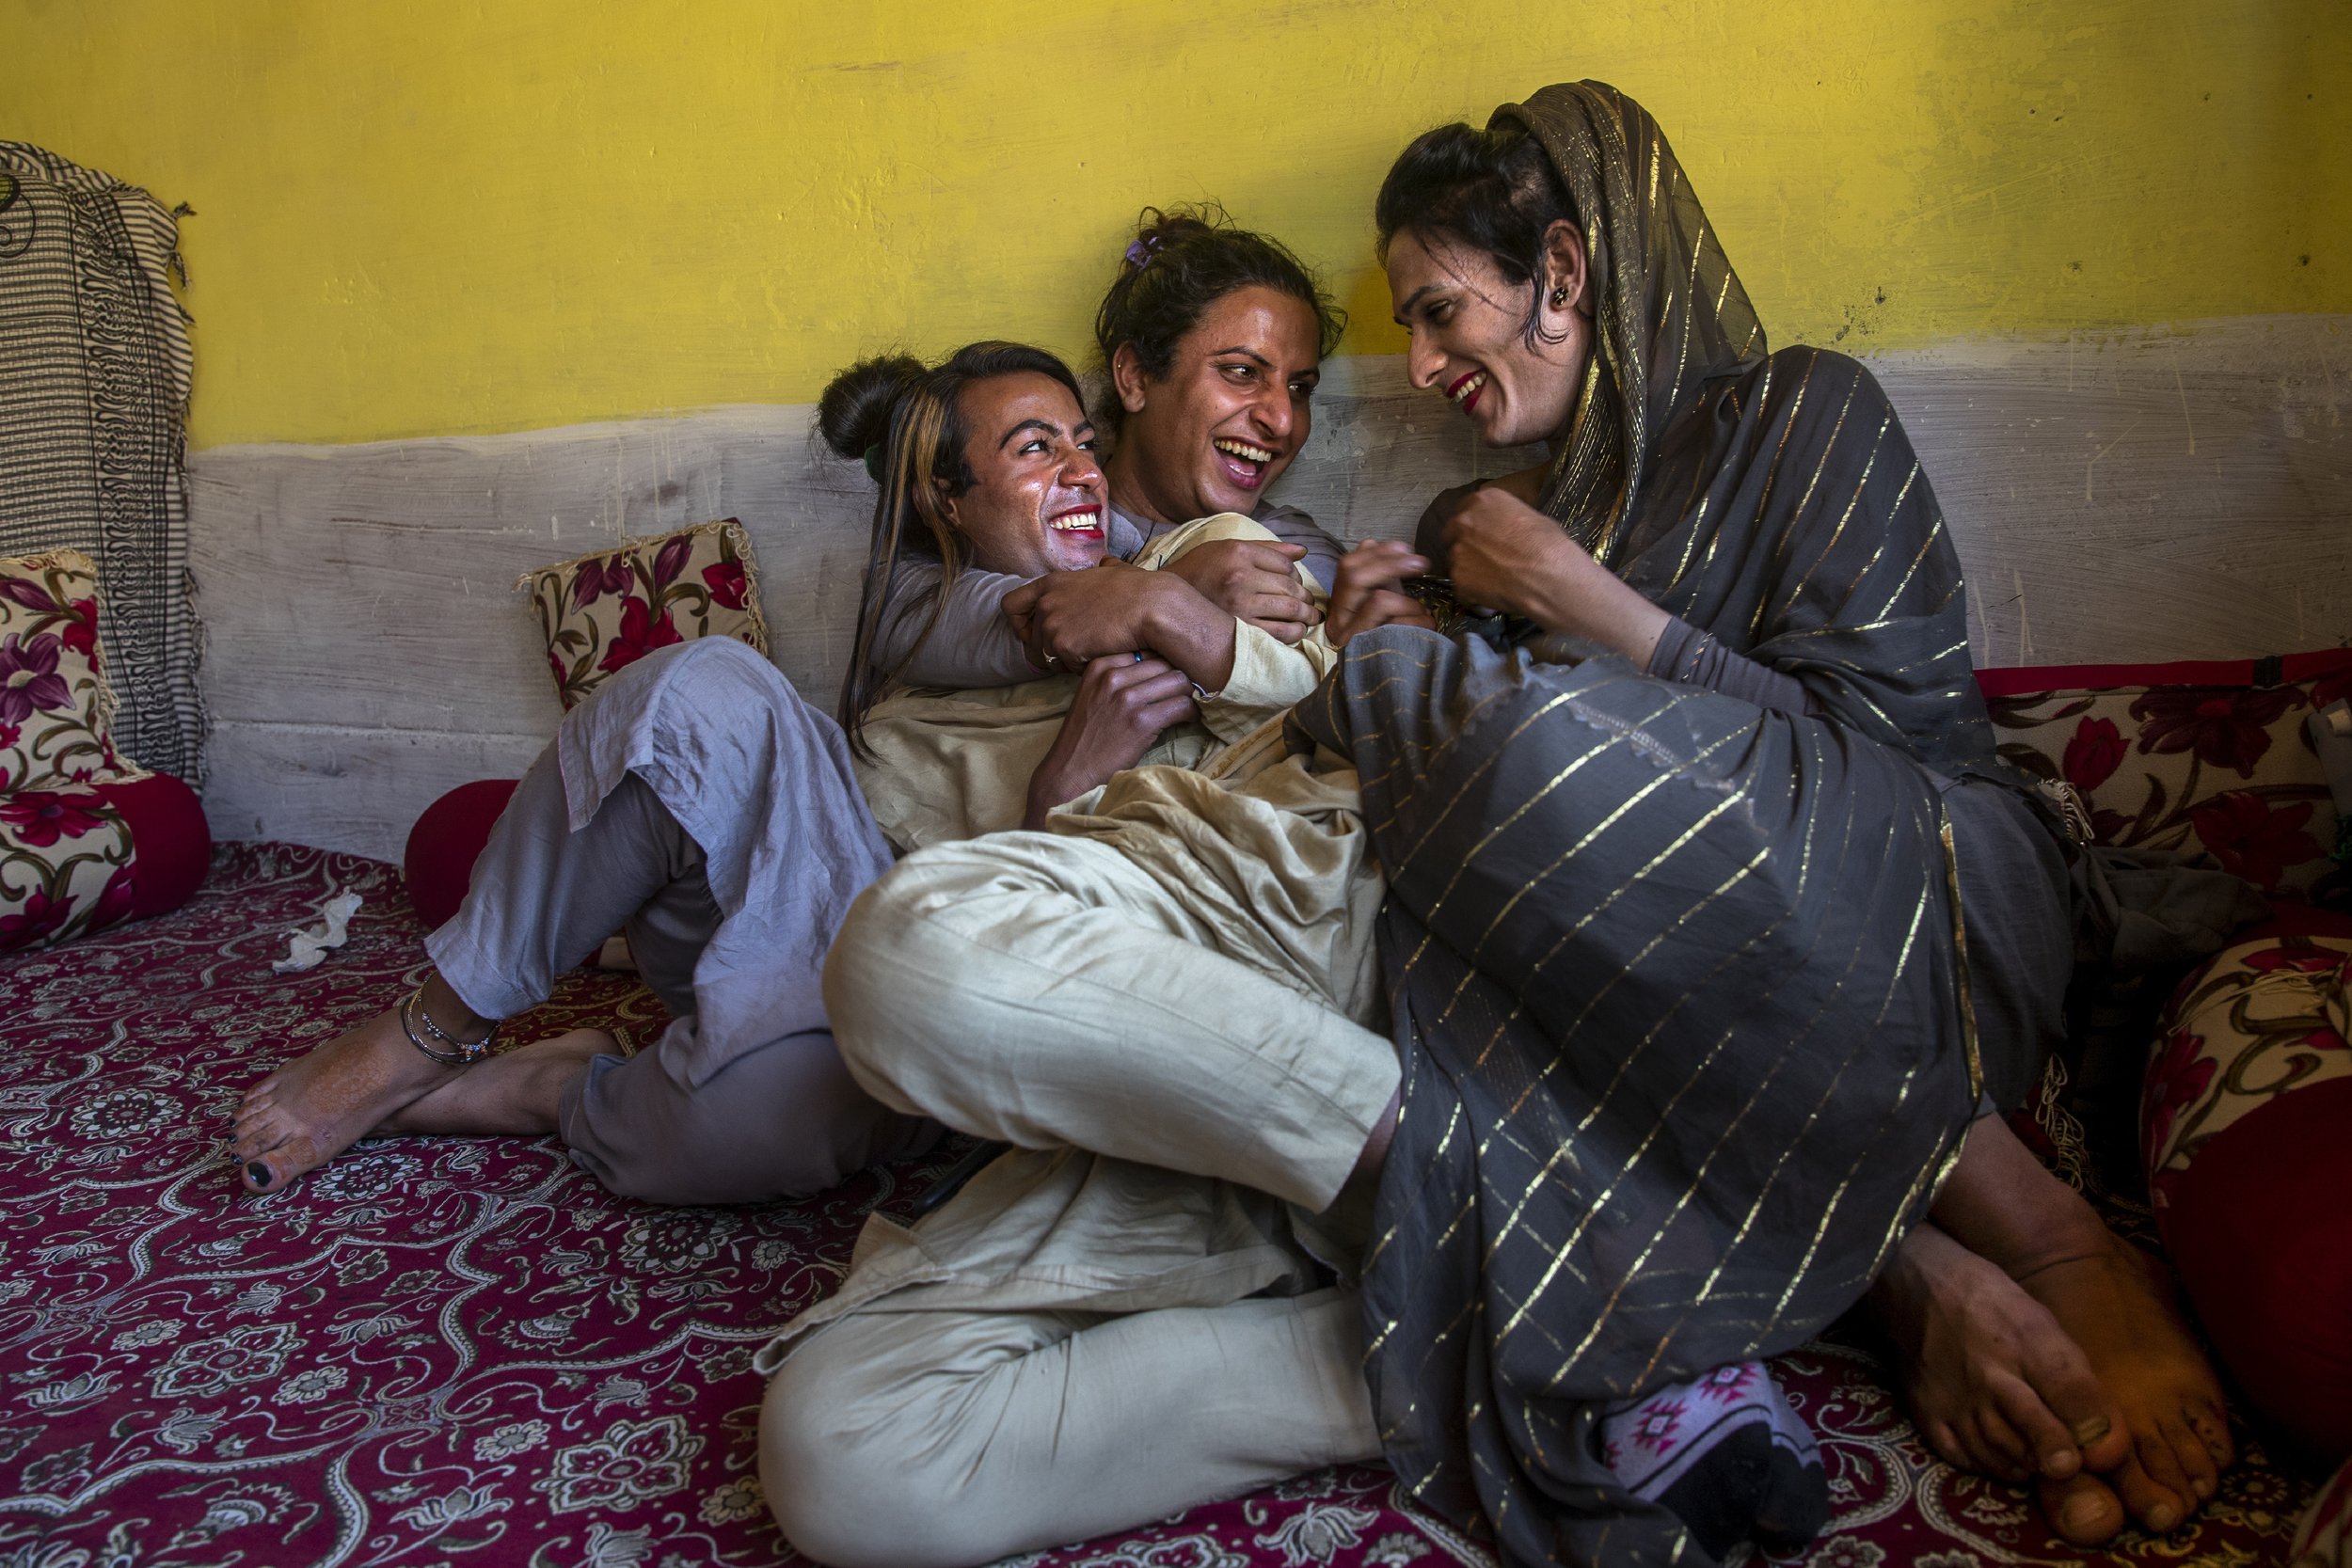  Khushi Mir, left, a transgender Kashmiri, relaxes with friends after a meeting of community members in the outskirts of Srinagar, Indian controlled Kashmir, on June 4, 2021. Khushi and four young boys have begun a volunteer group to distribute food 